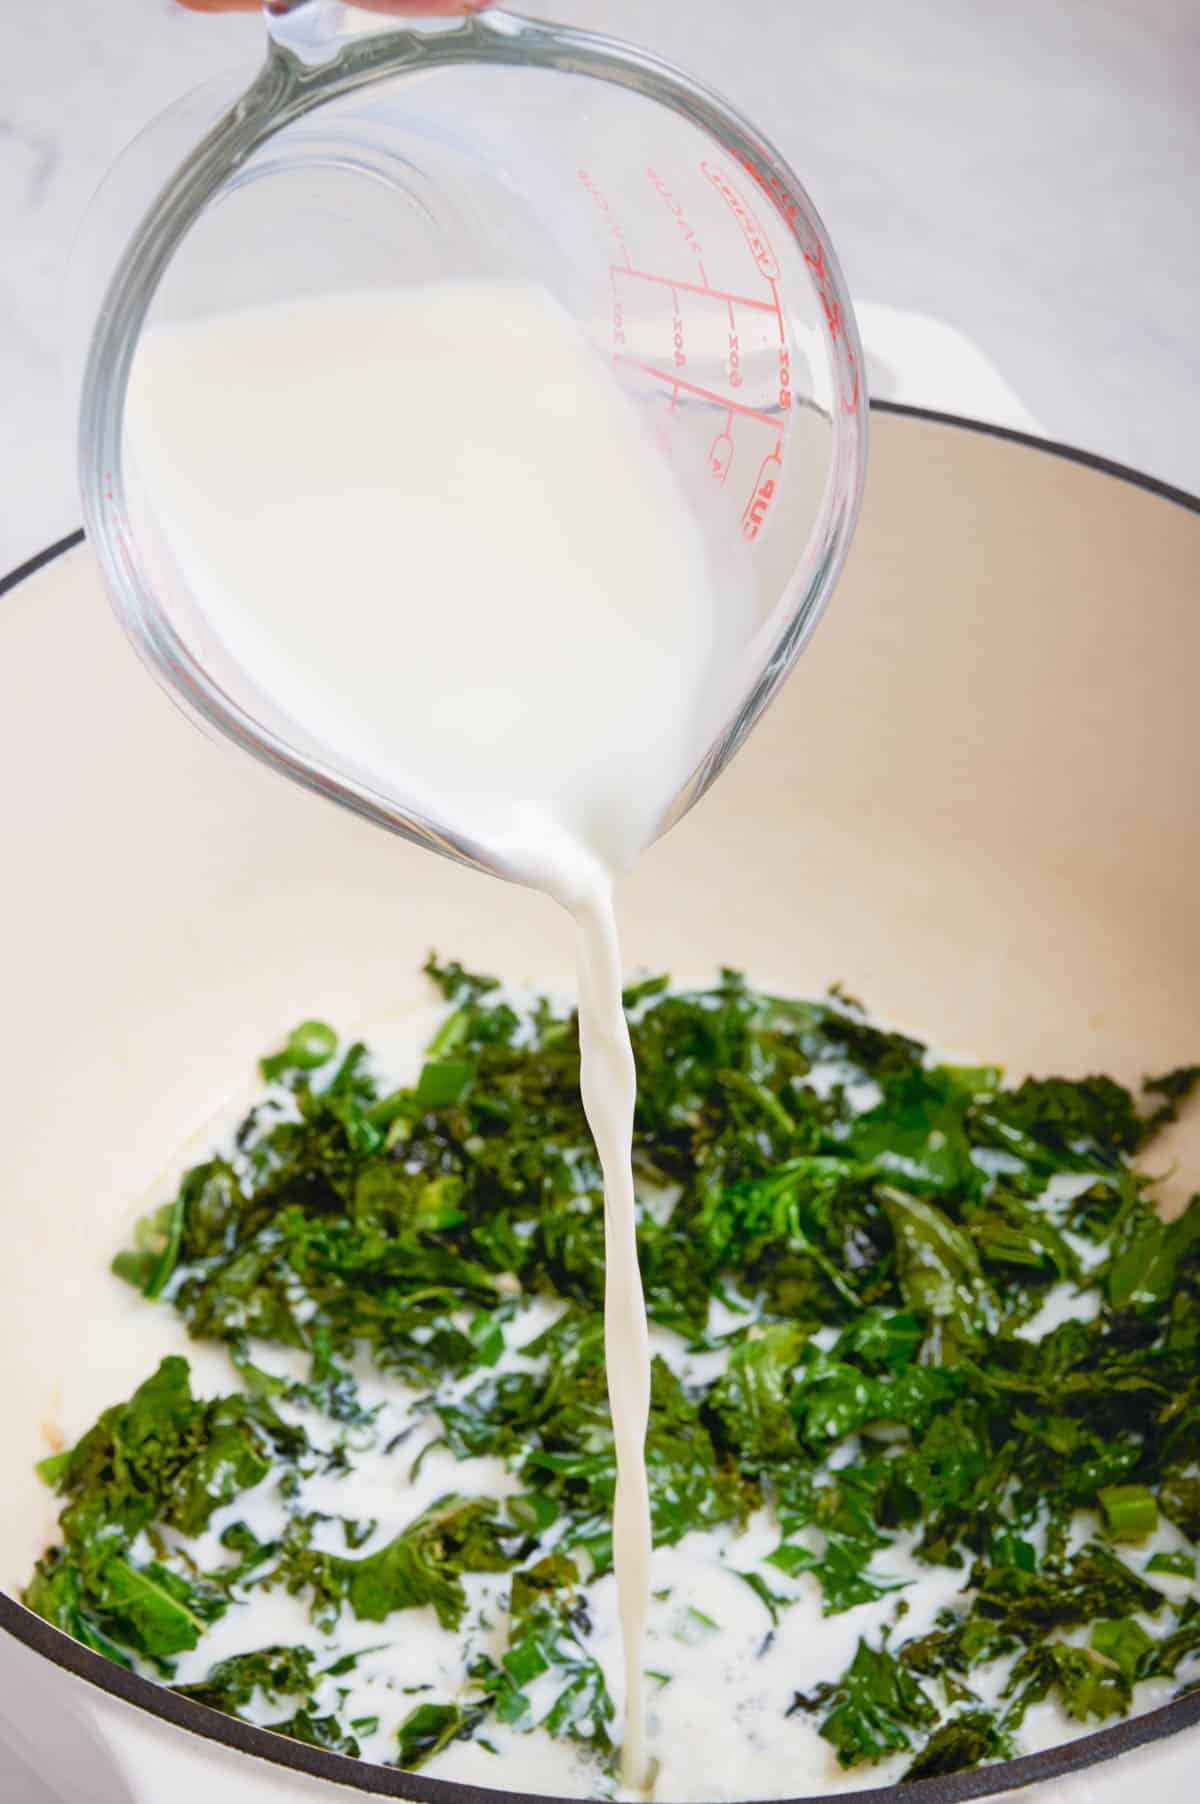 Milk is added to the kale.